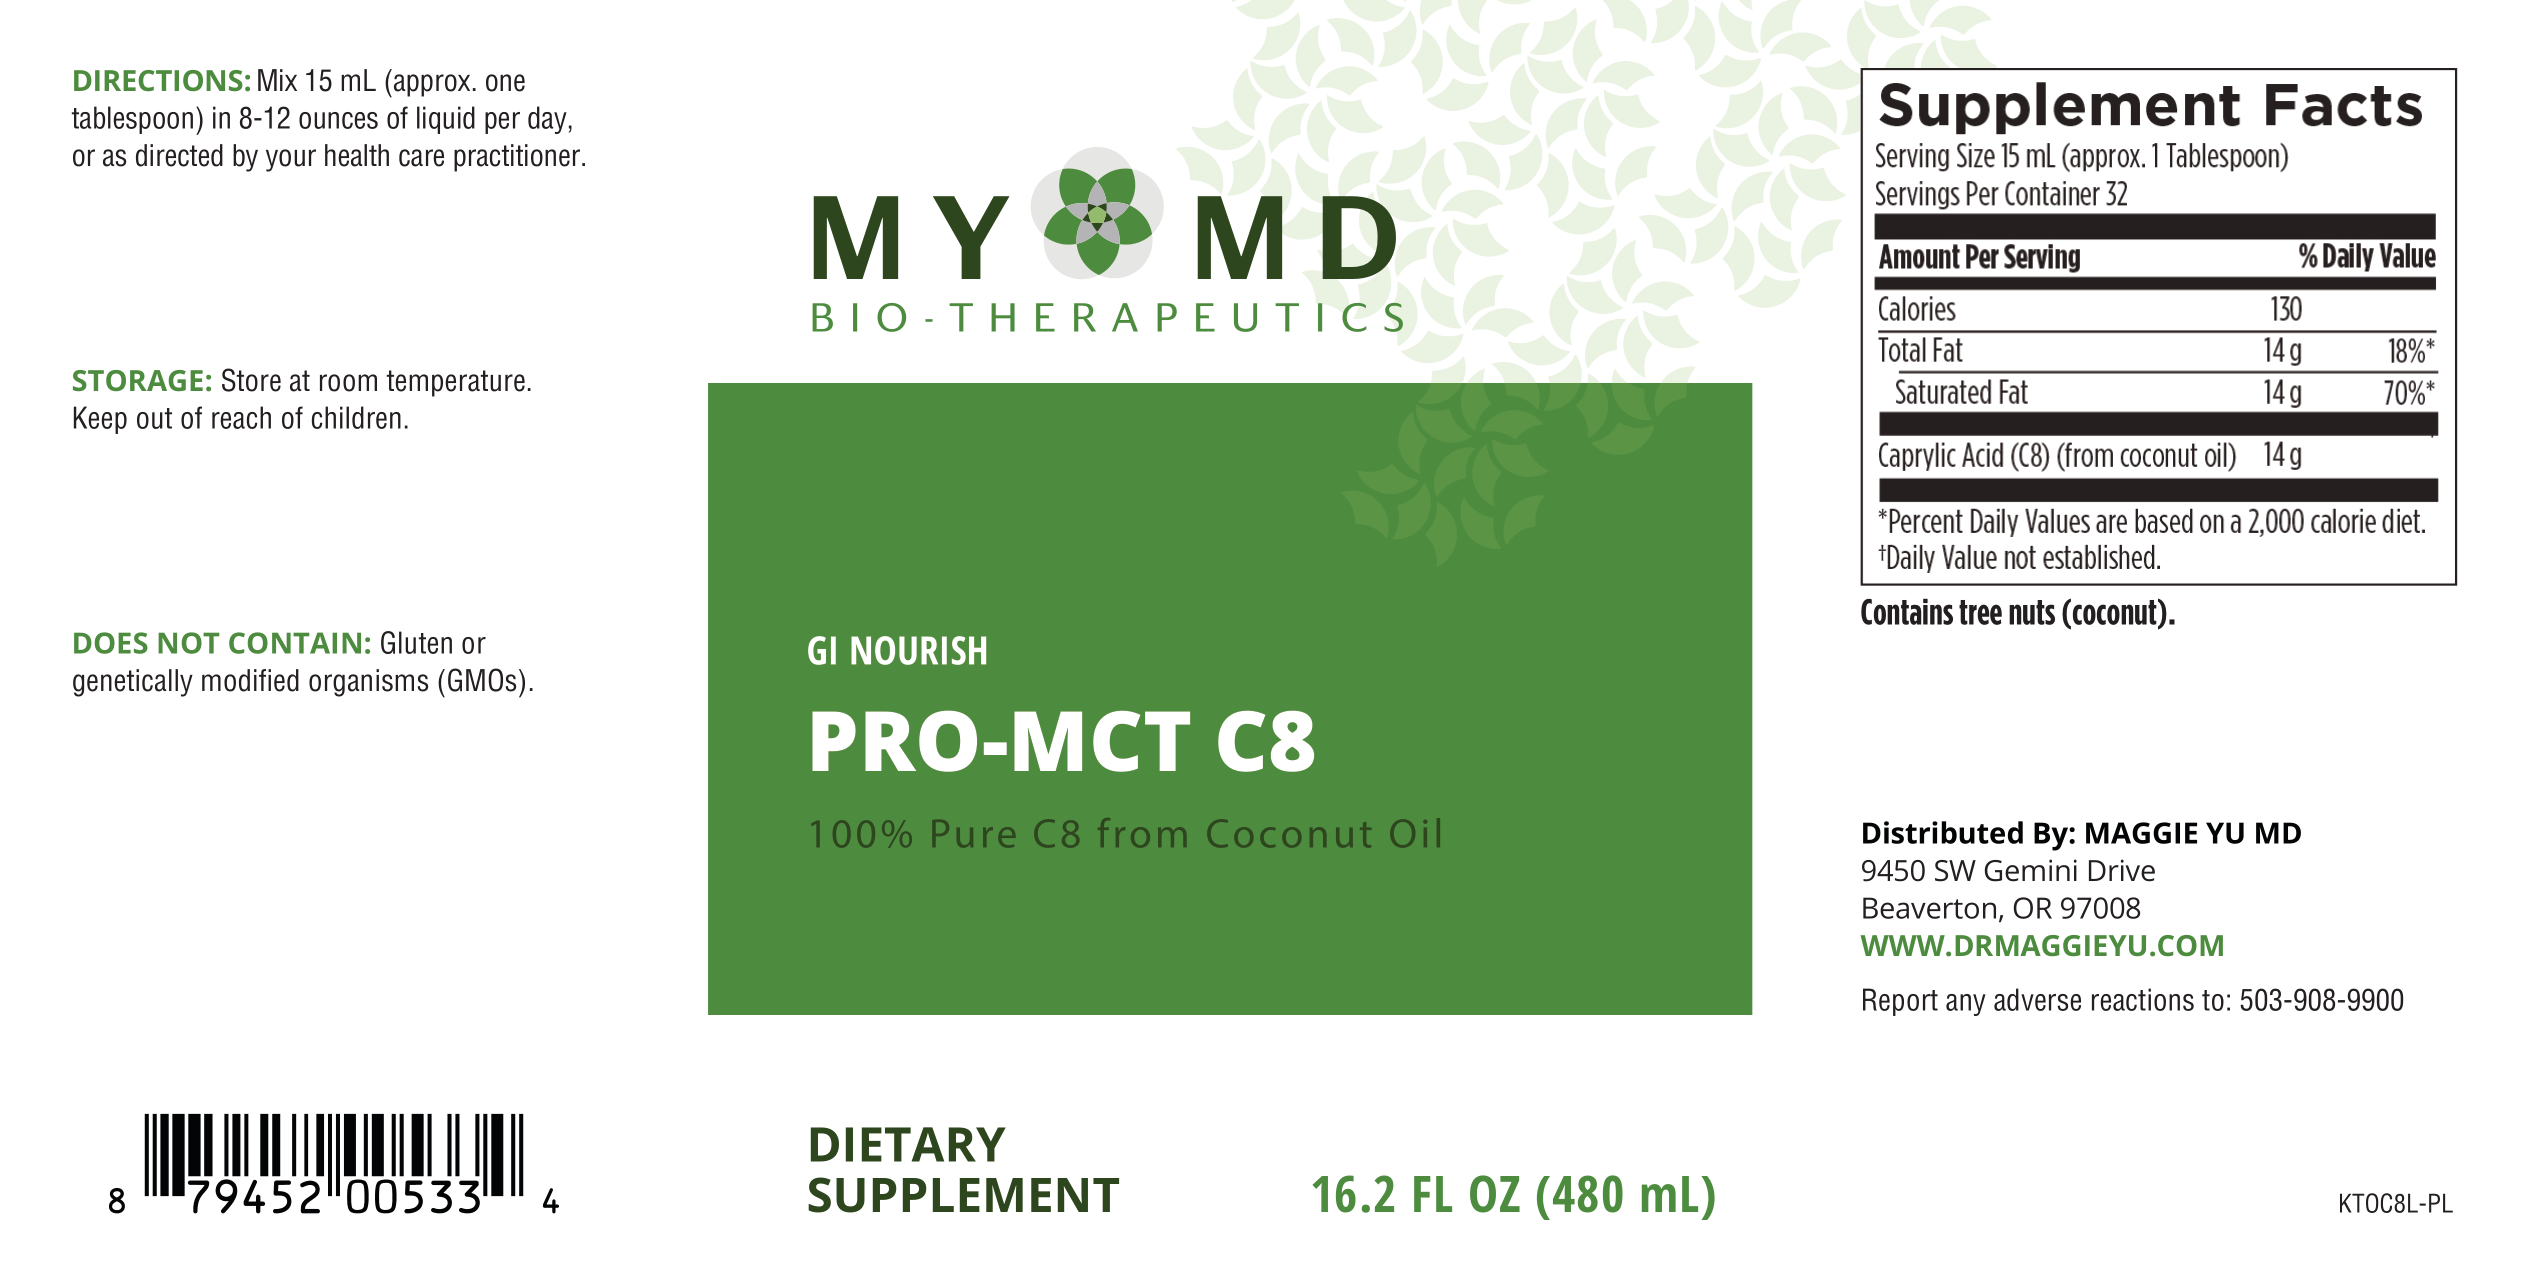 PRO-MCT C8 Right fat for healing leaky gut